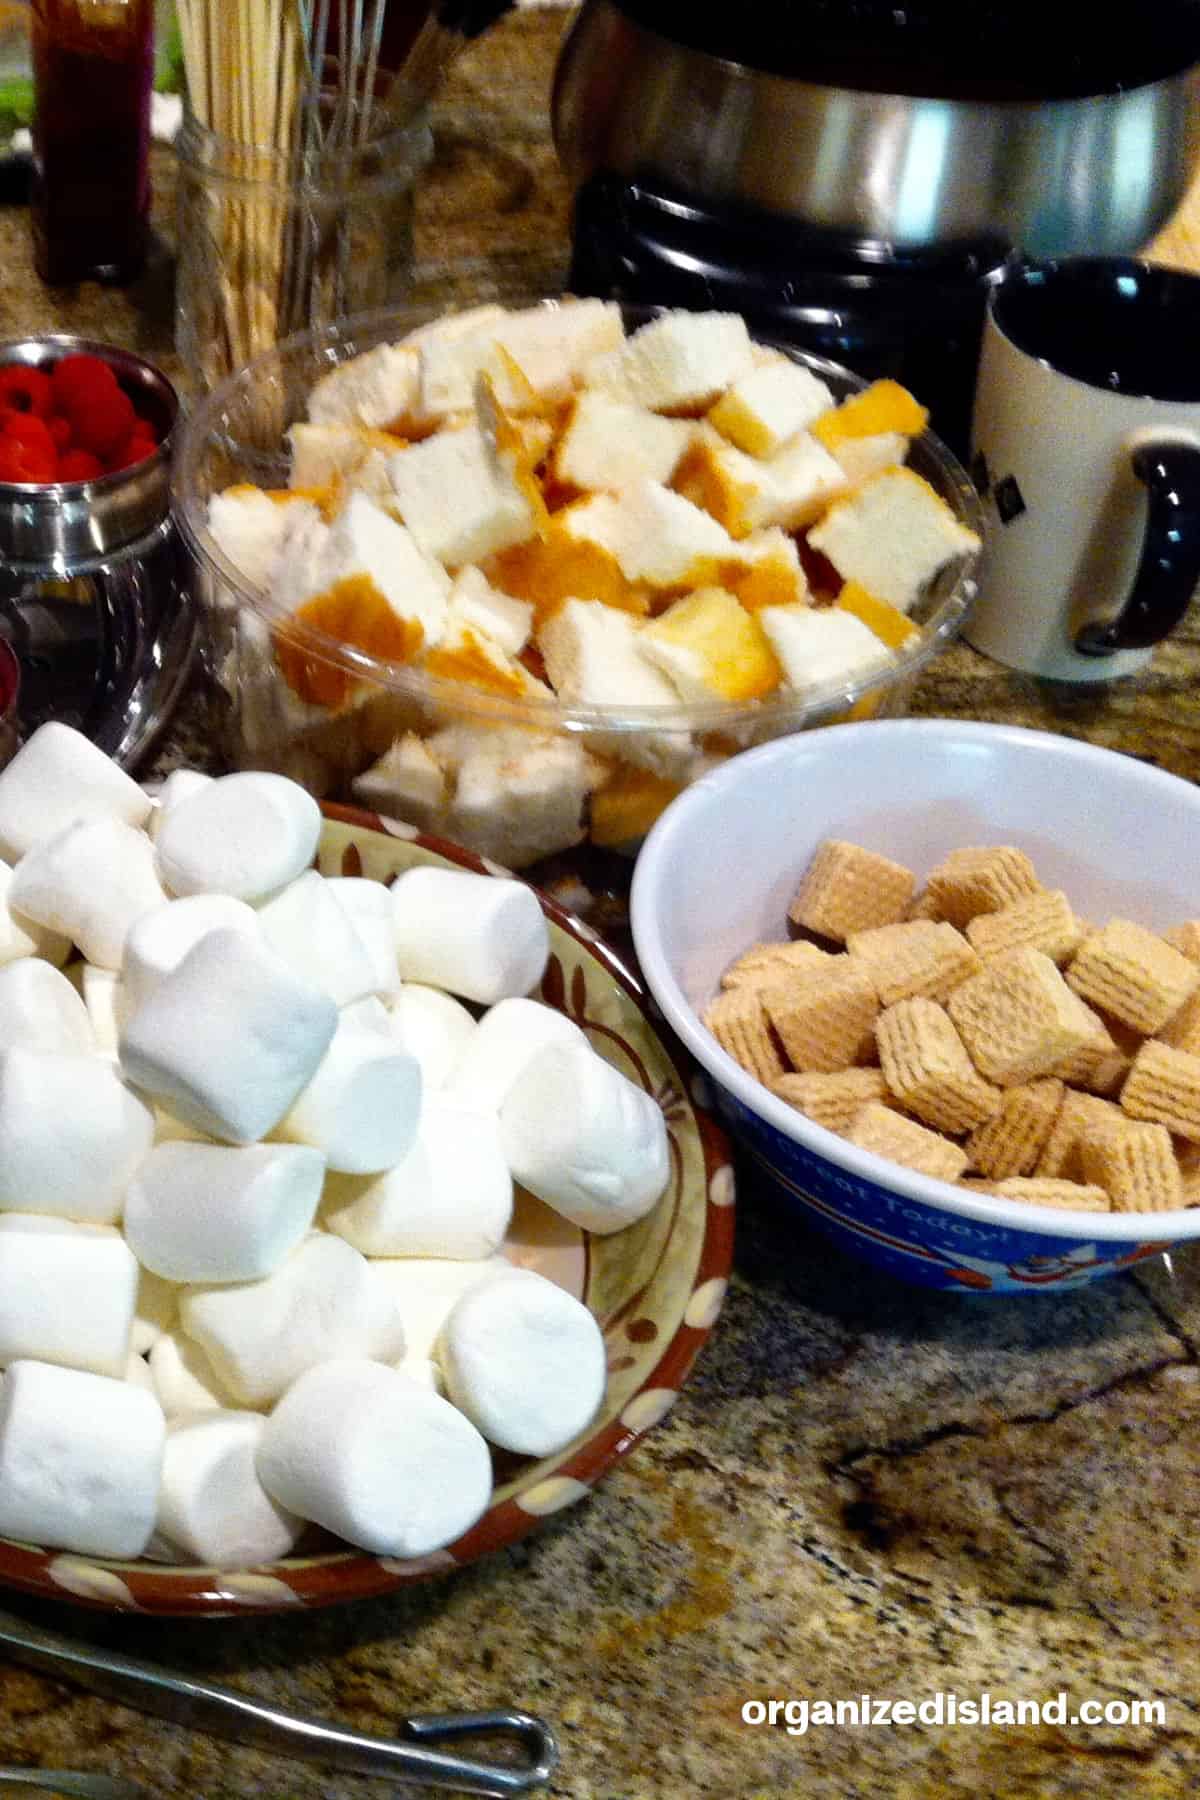 Marshmallows, angel food cake and bread for a fondue party.